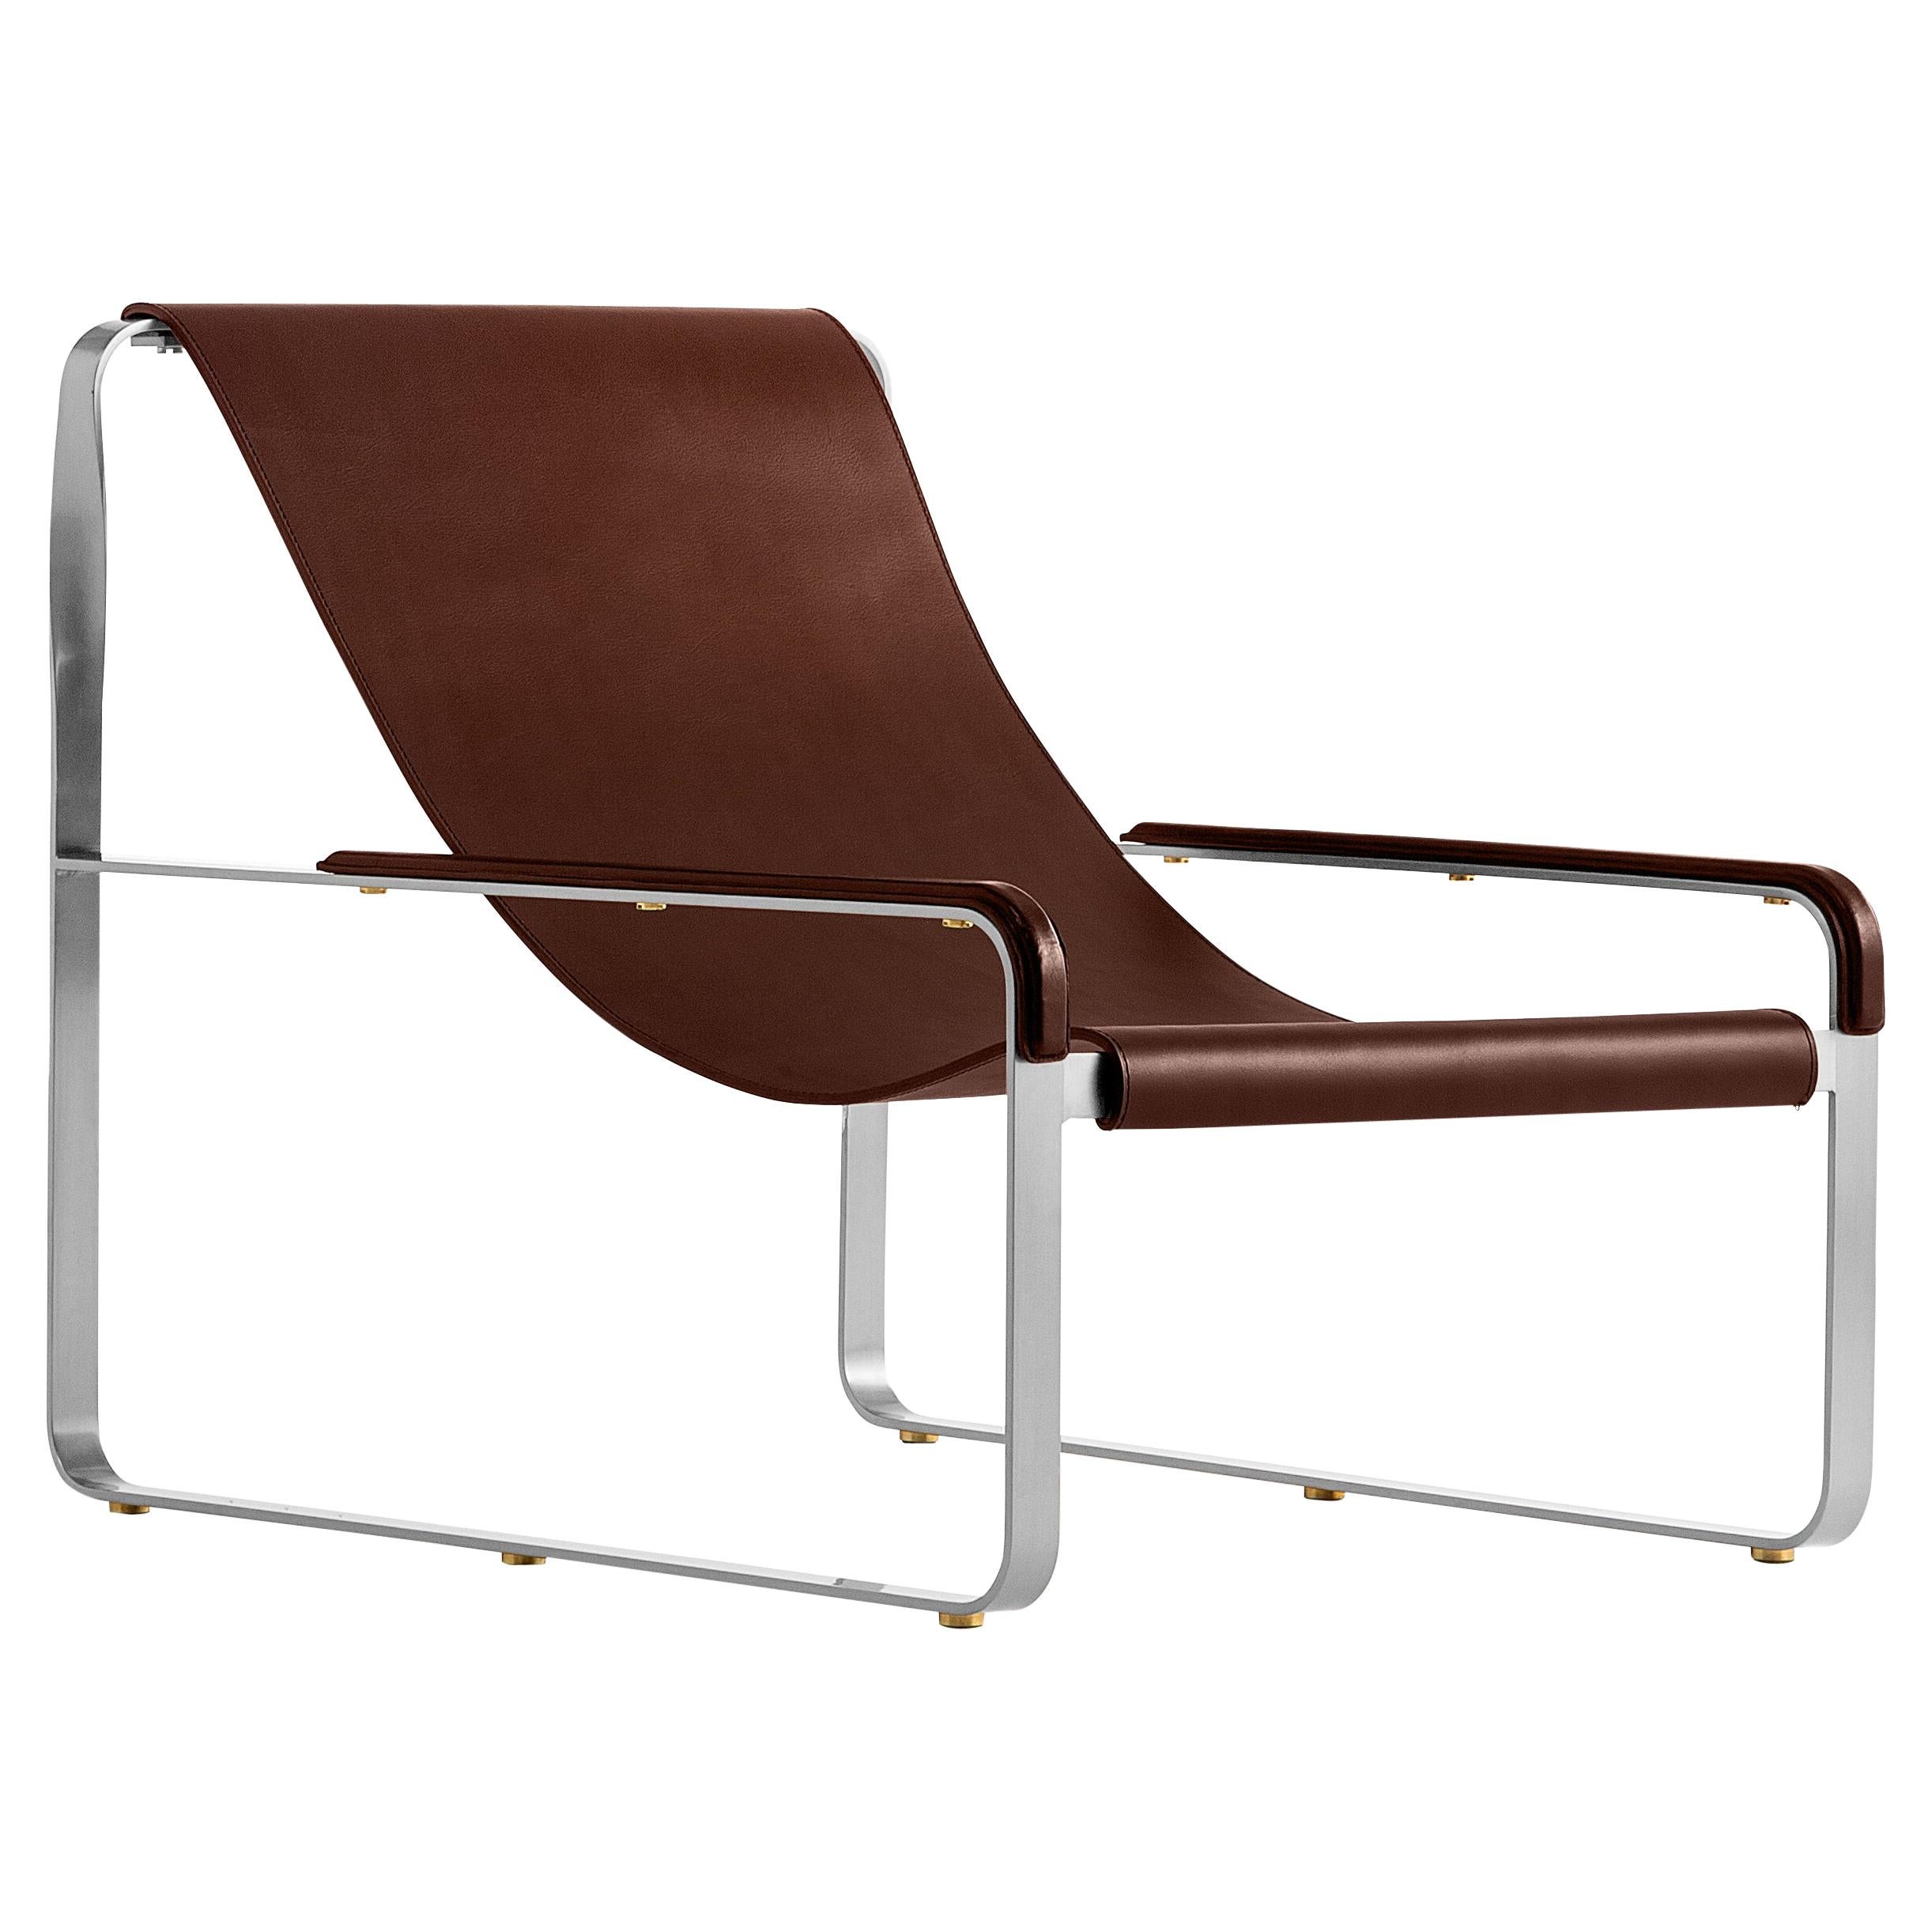 Artisan Made Contemporary Chaise Lounge Old Silver Steel & Dark Brown Leather im Angebot